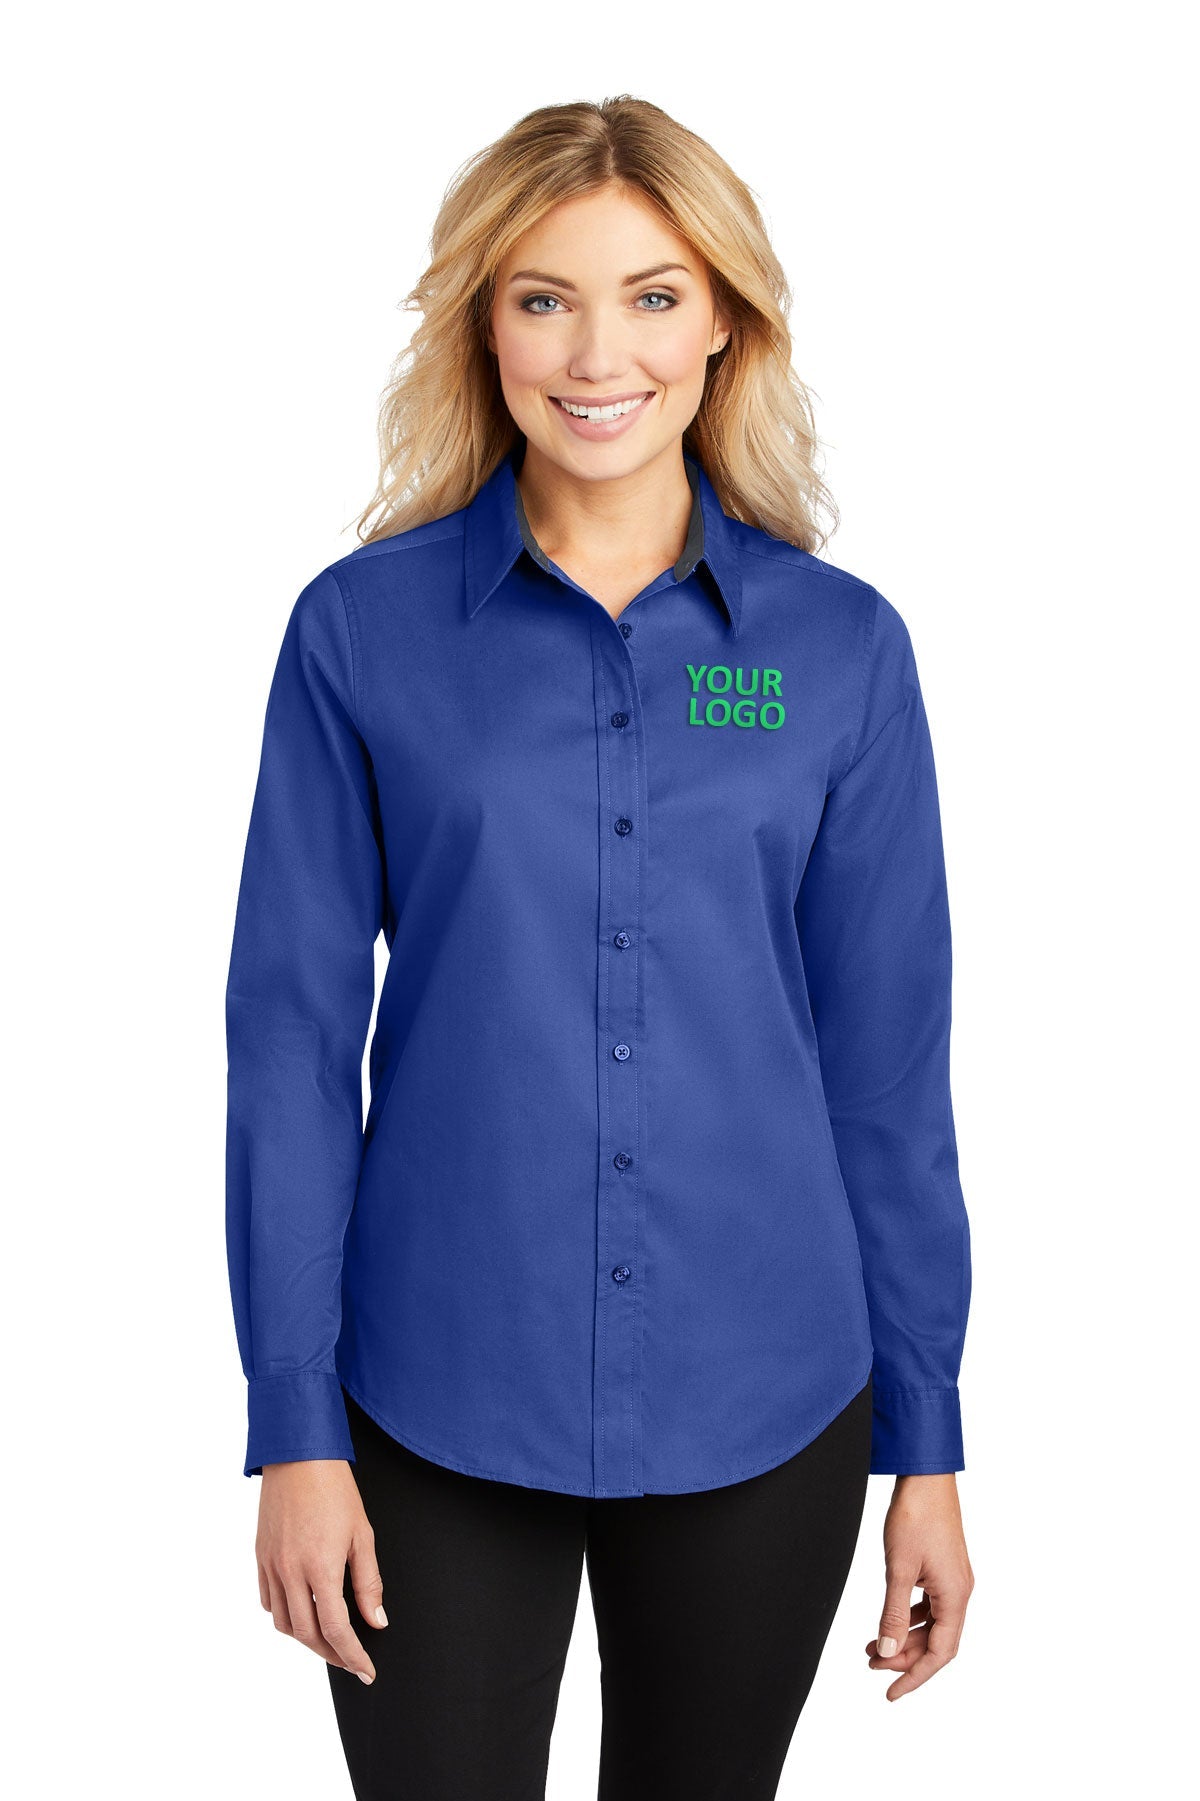 Port Authority Royal/ Classic Navy L608 custom embroidered shirts